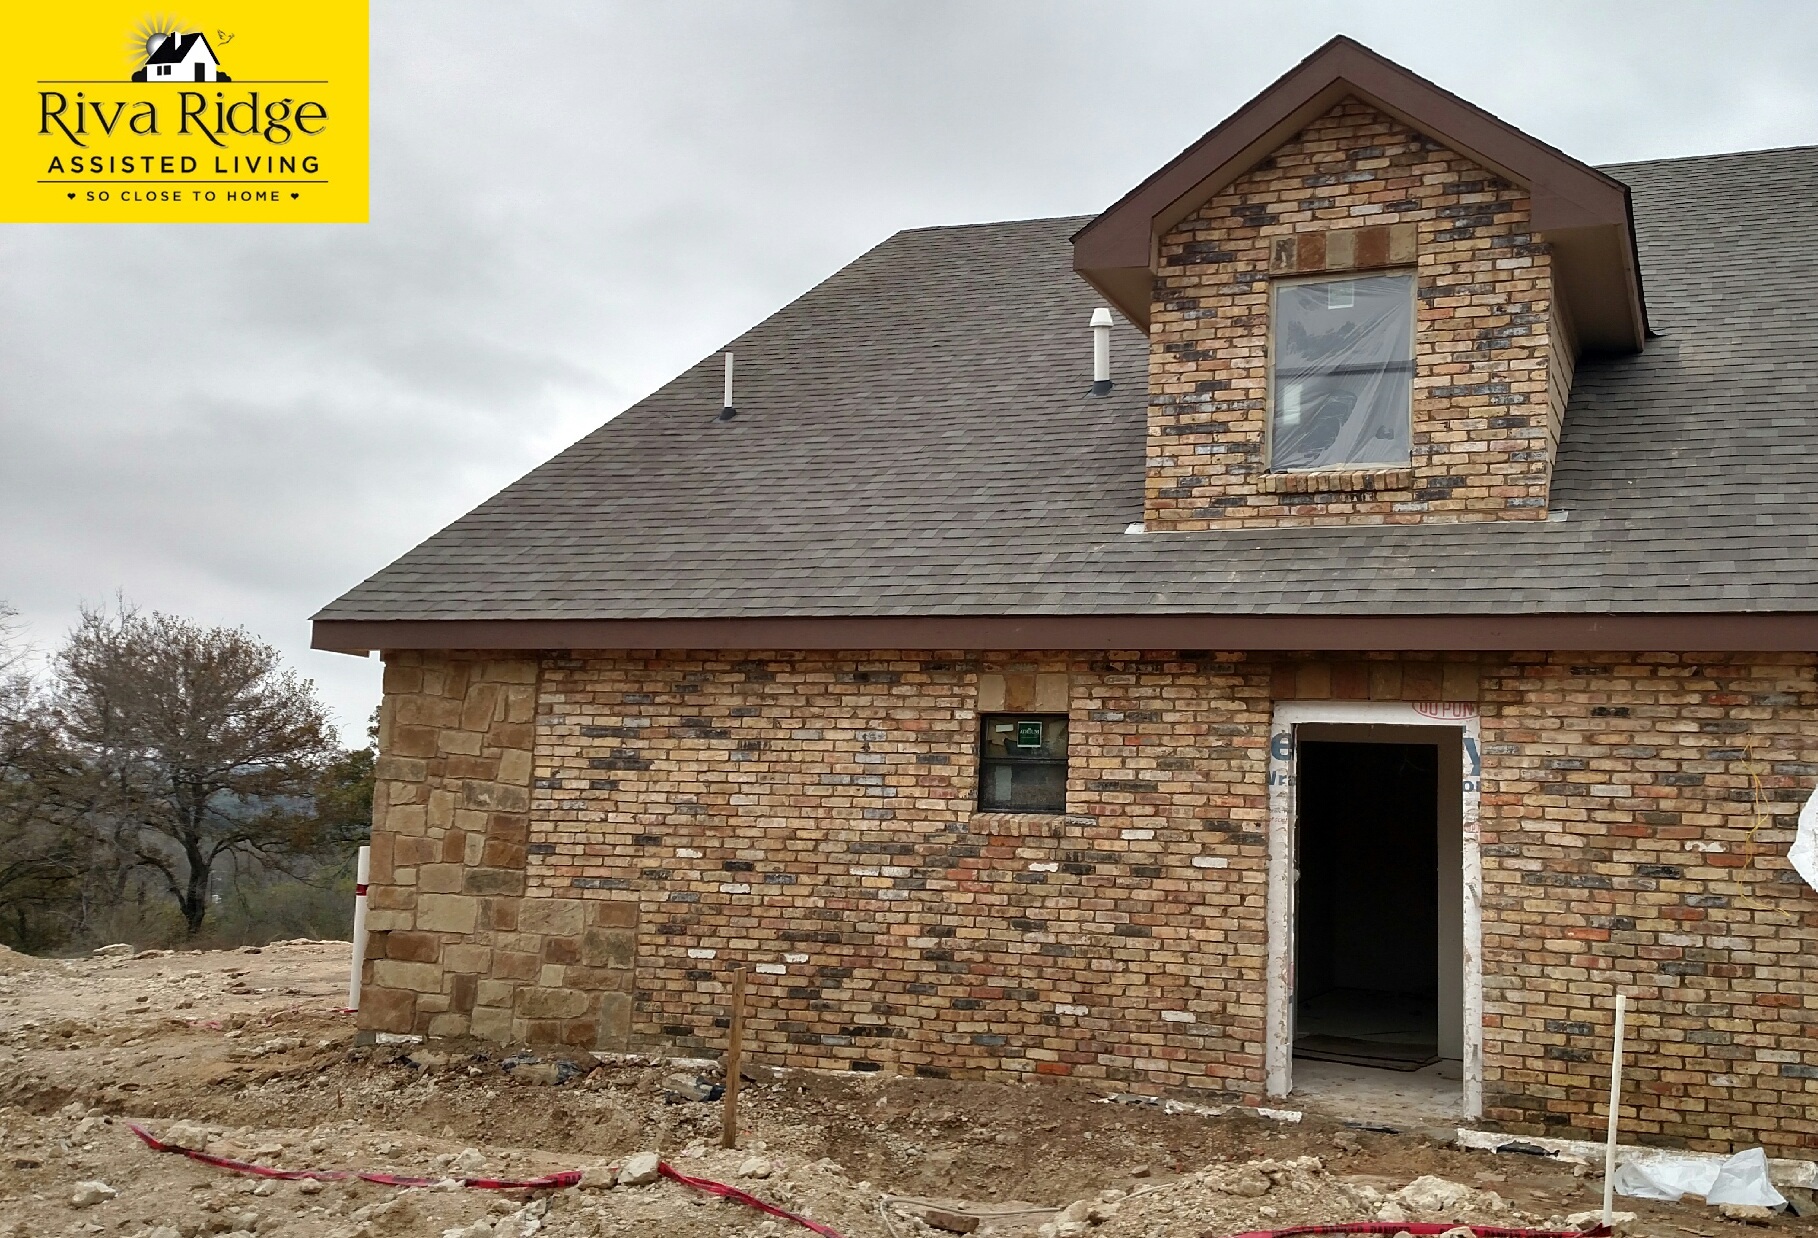 Construction progress on Riva Ridge Assisted Living in Leander Texas